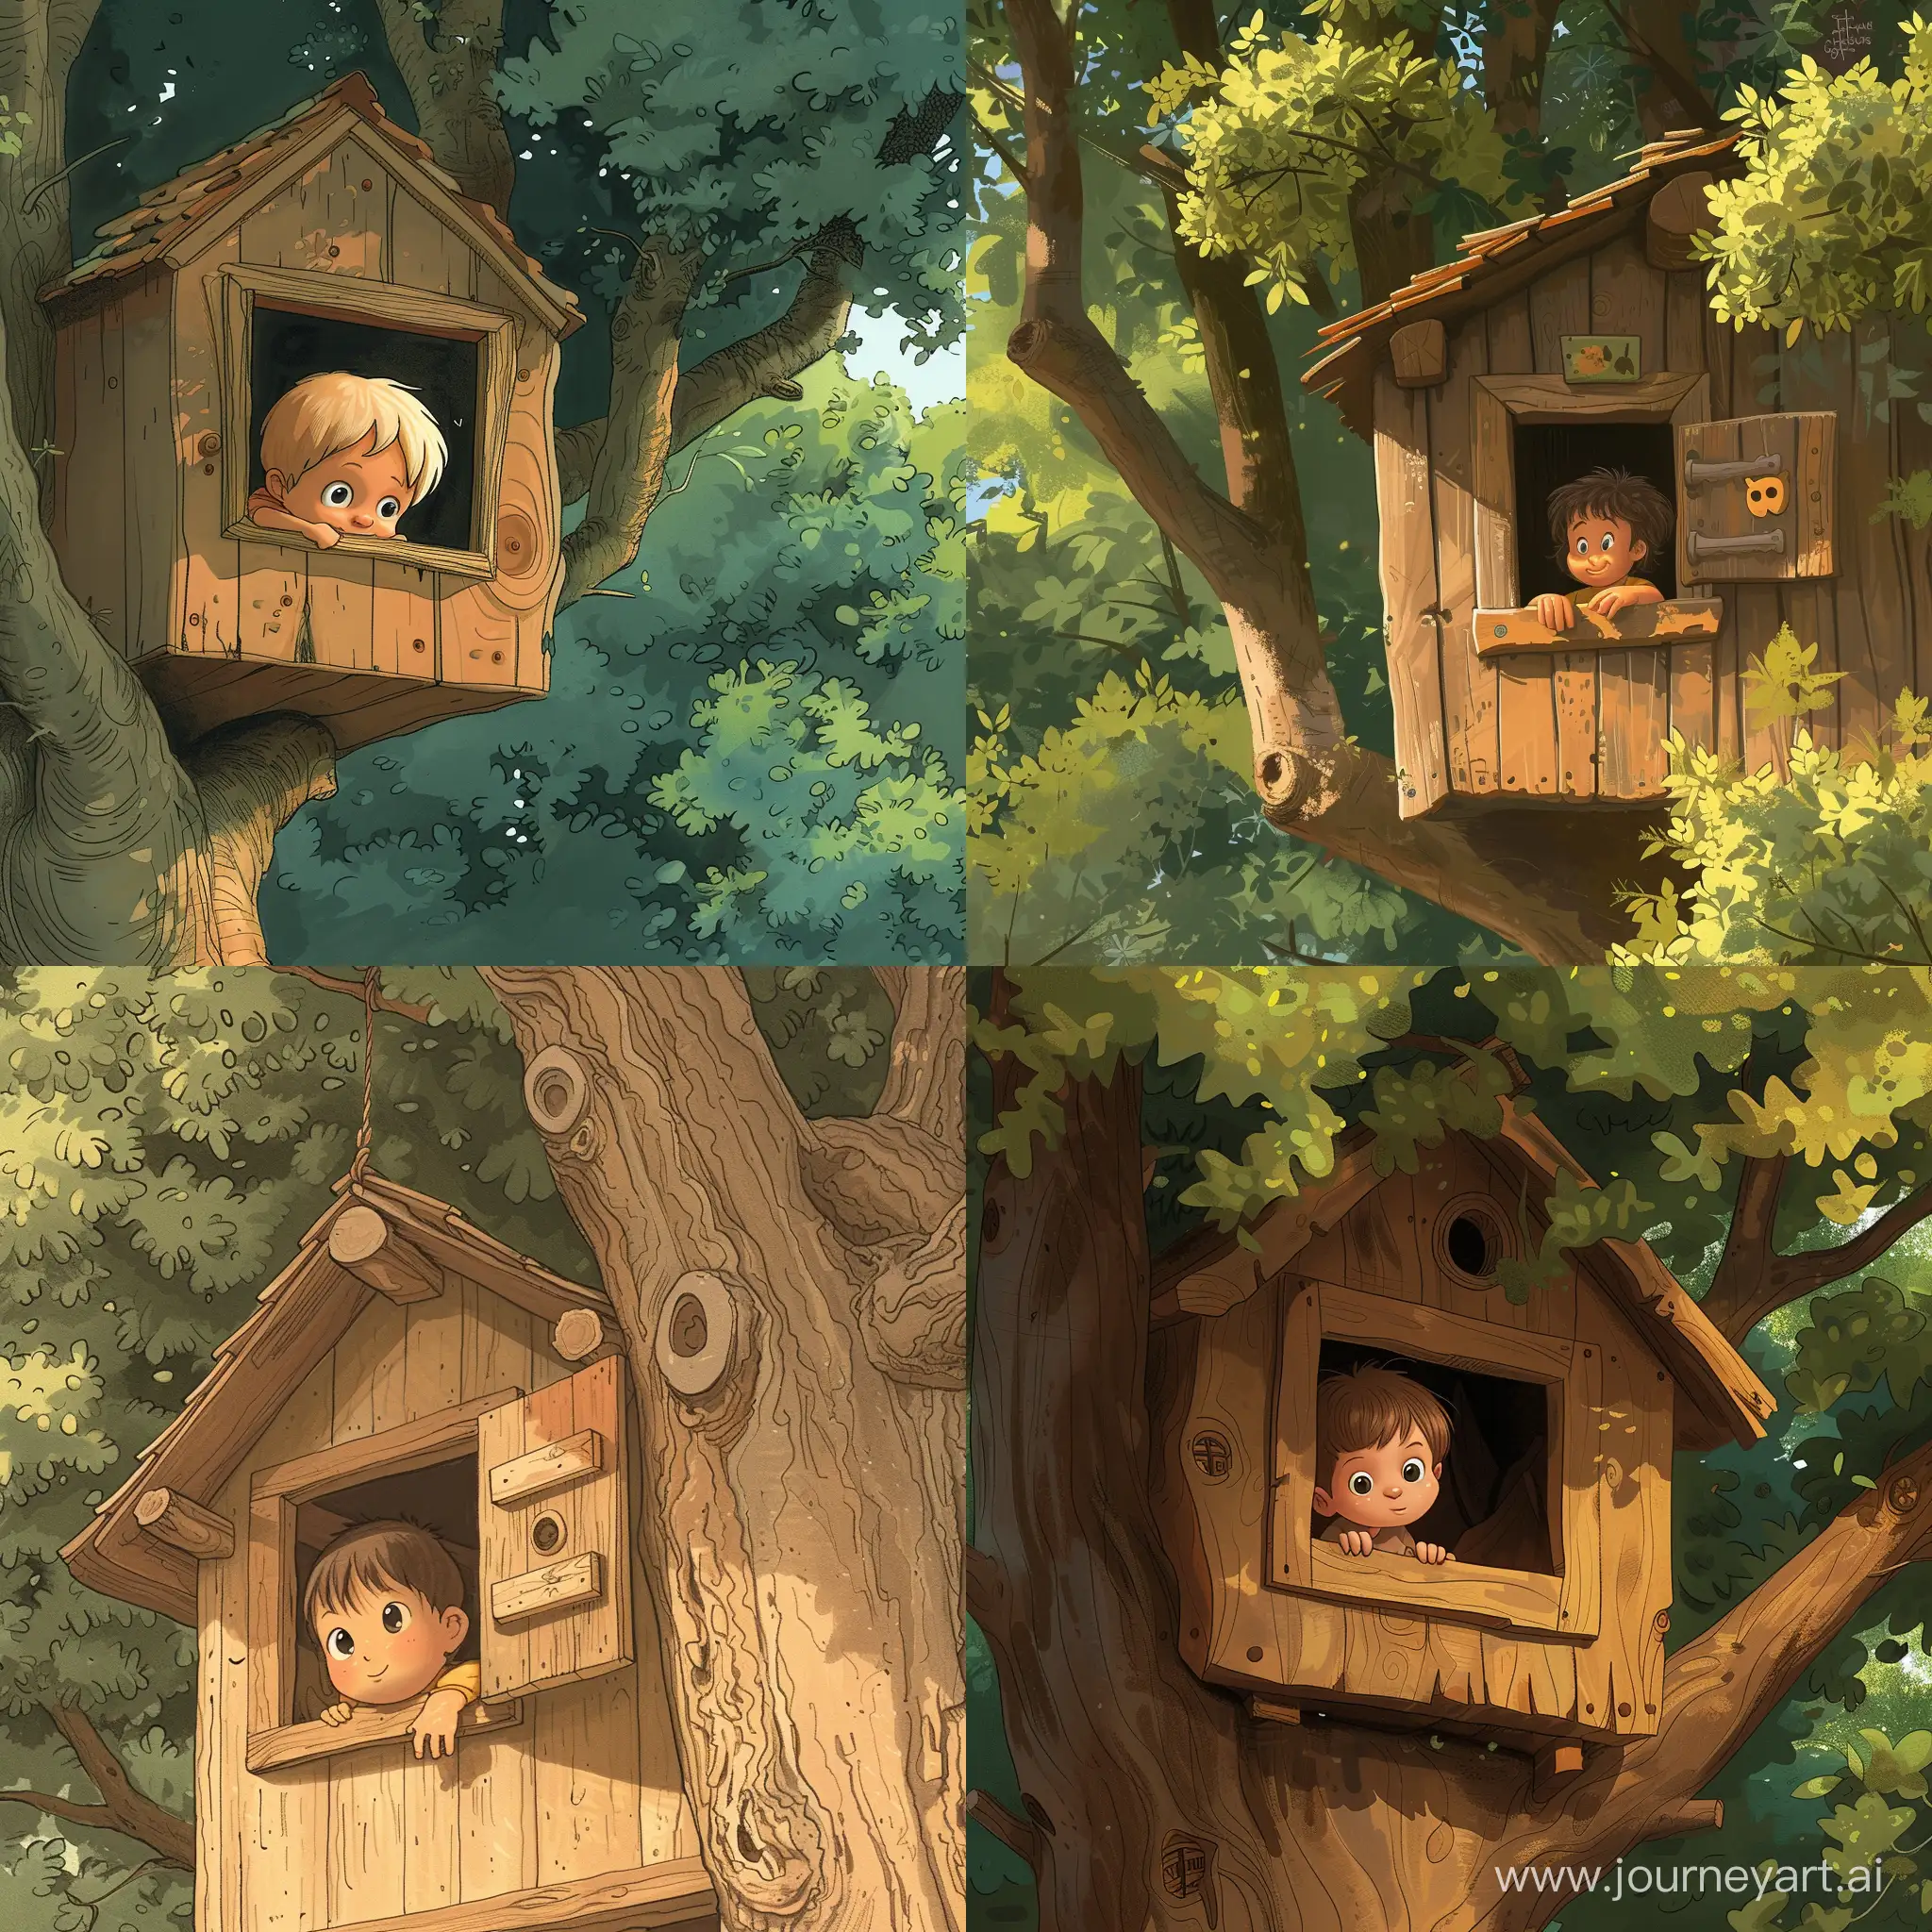 Shot of child in a treehouse looking out of a small wooden window, in cartoon style